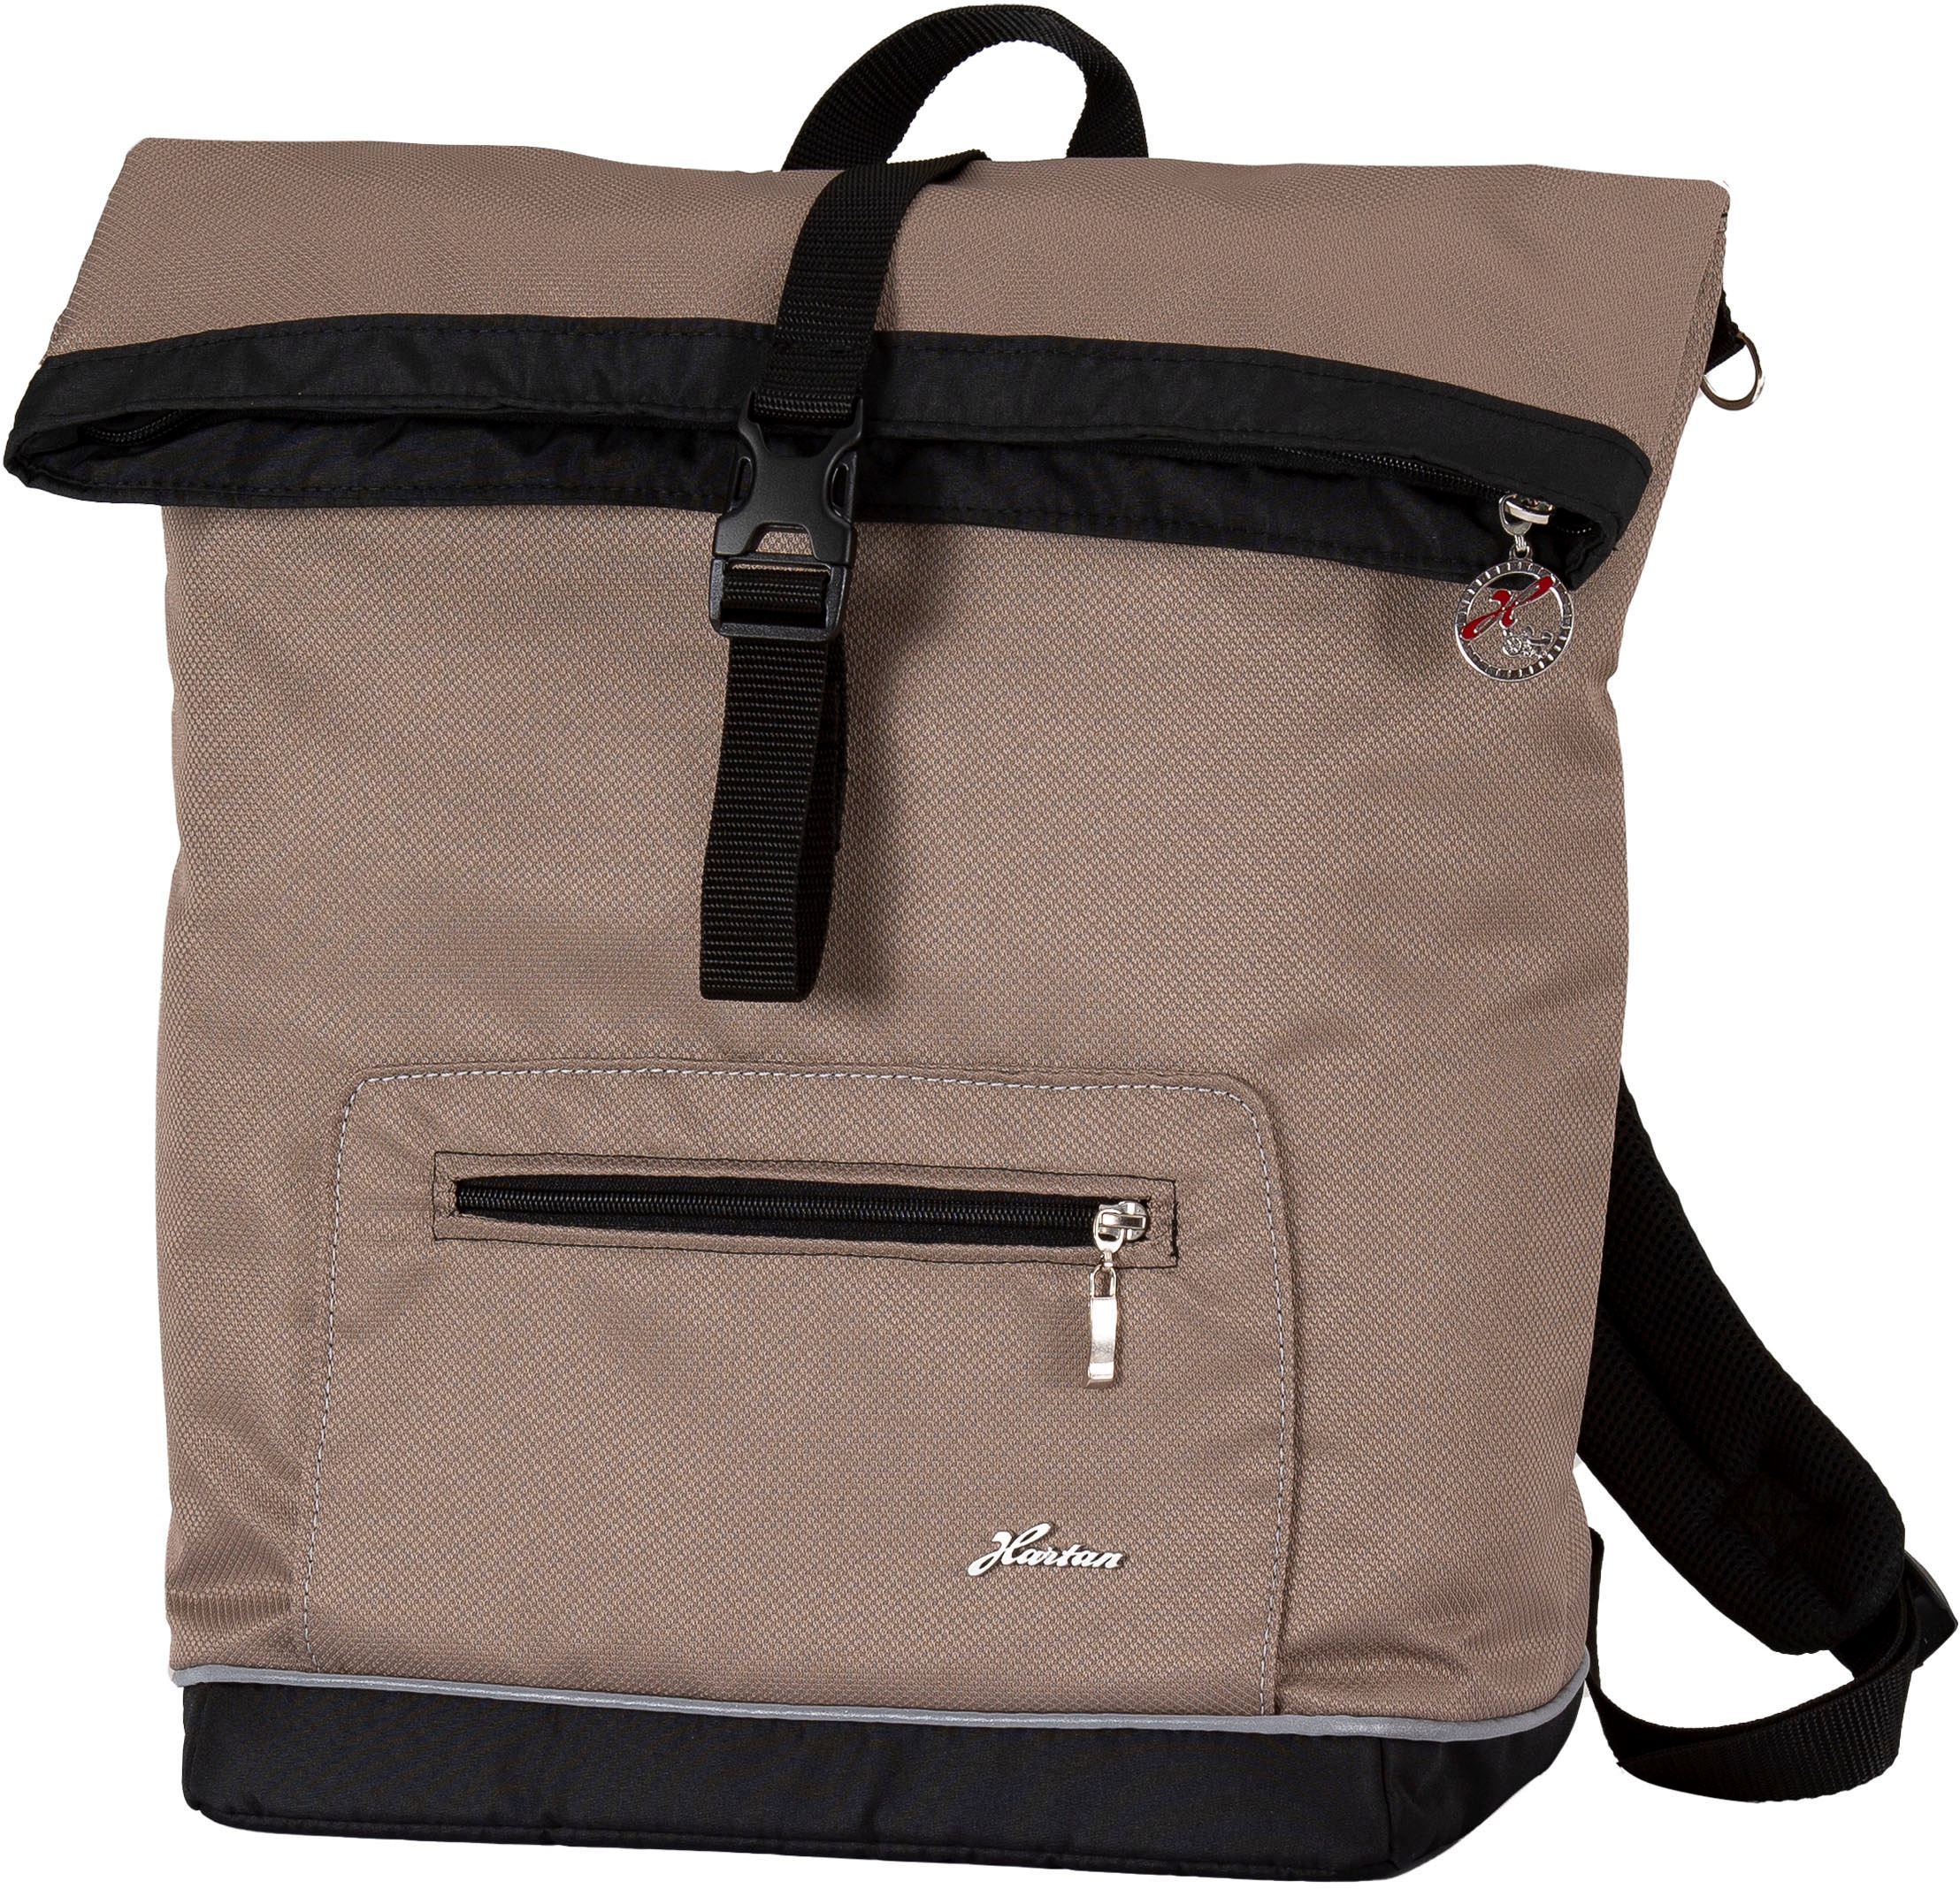 Wickelrucksack »Space bag - Casual Collection«, mit Thermofach; Made in Germany